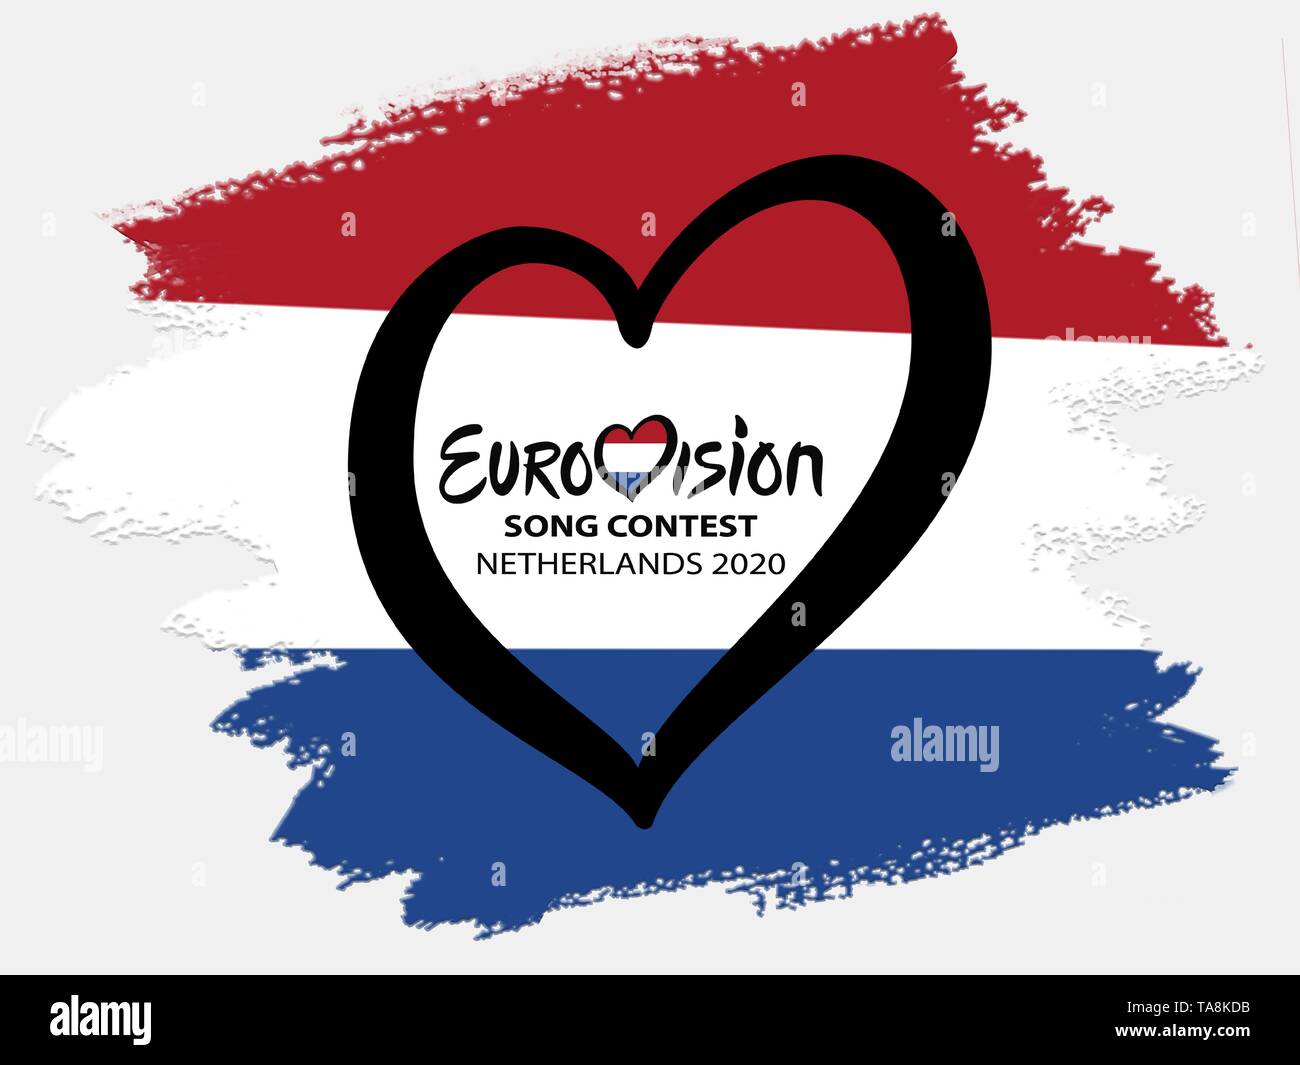 Winner of Eurovision Song Contest 2019. TEL AVIV, ISRAEL - May 2019: Text Netherlands 2020 Eurovision Heart on white background Stock Vector